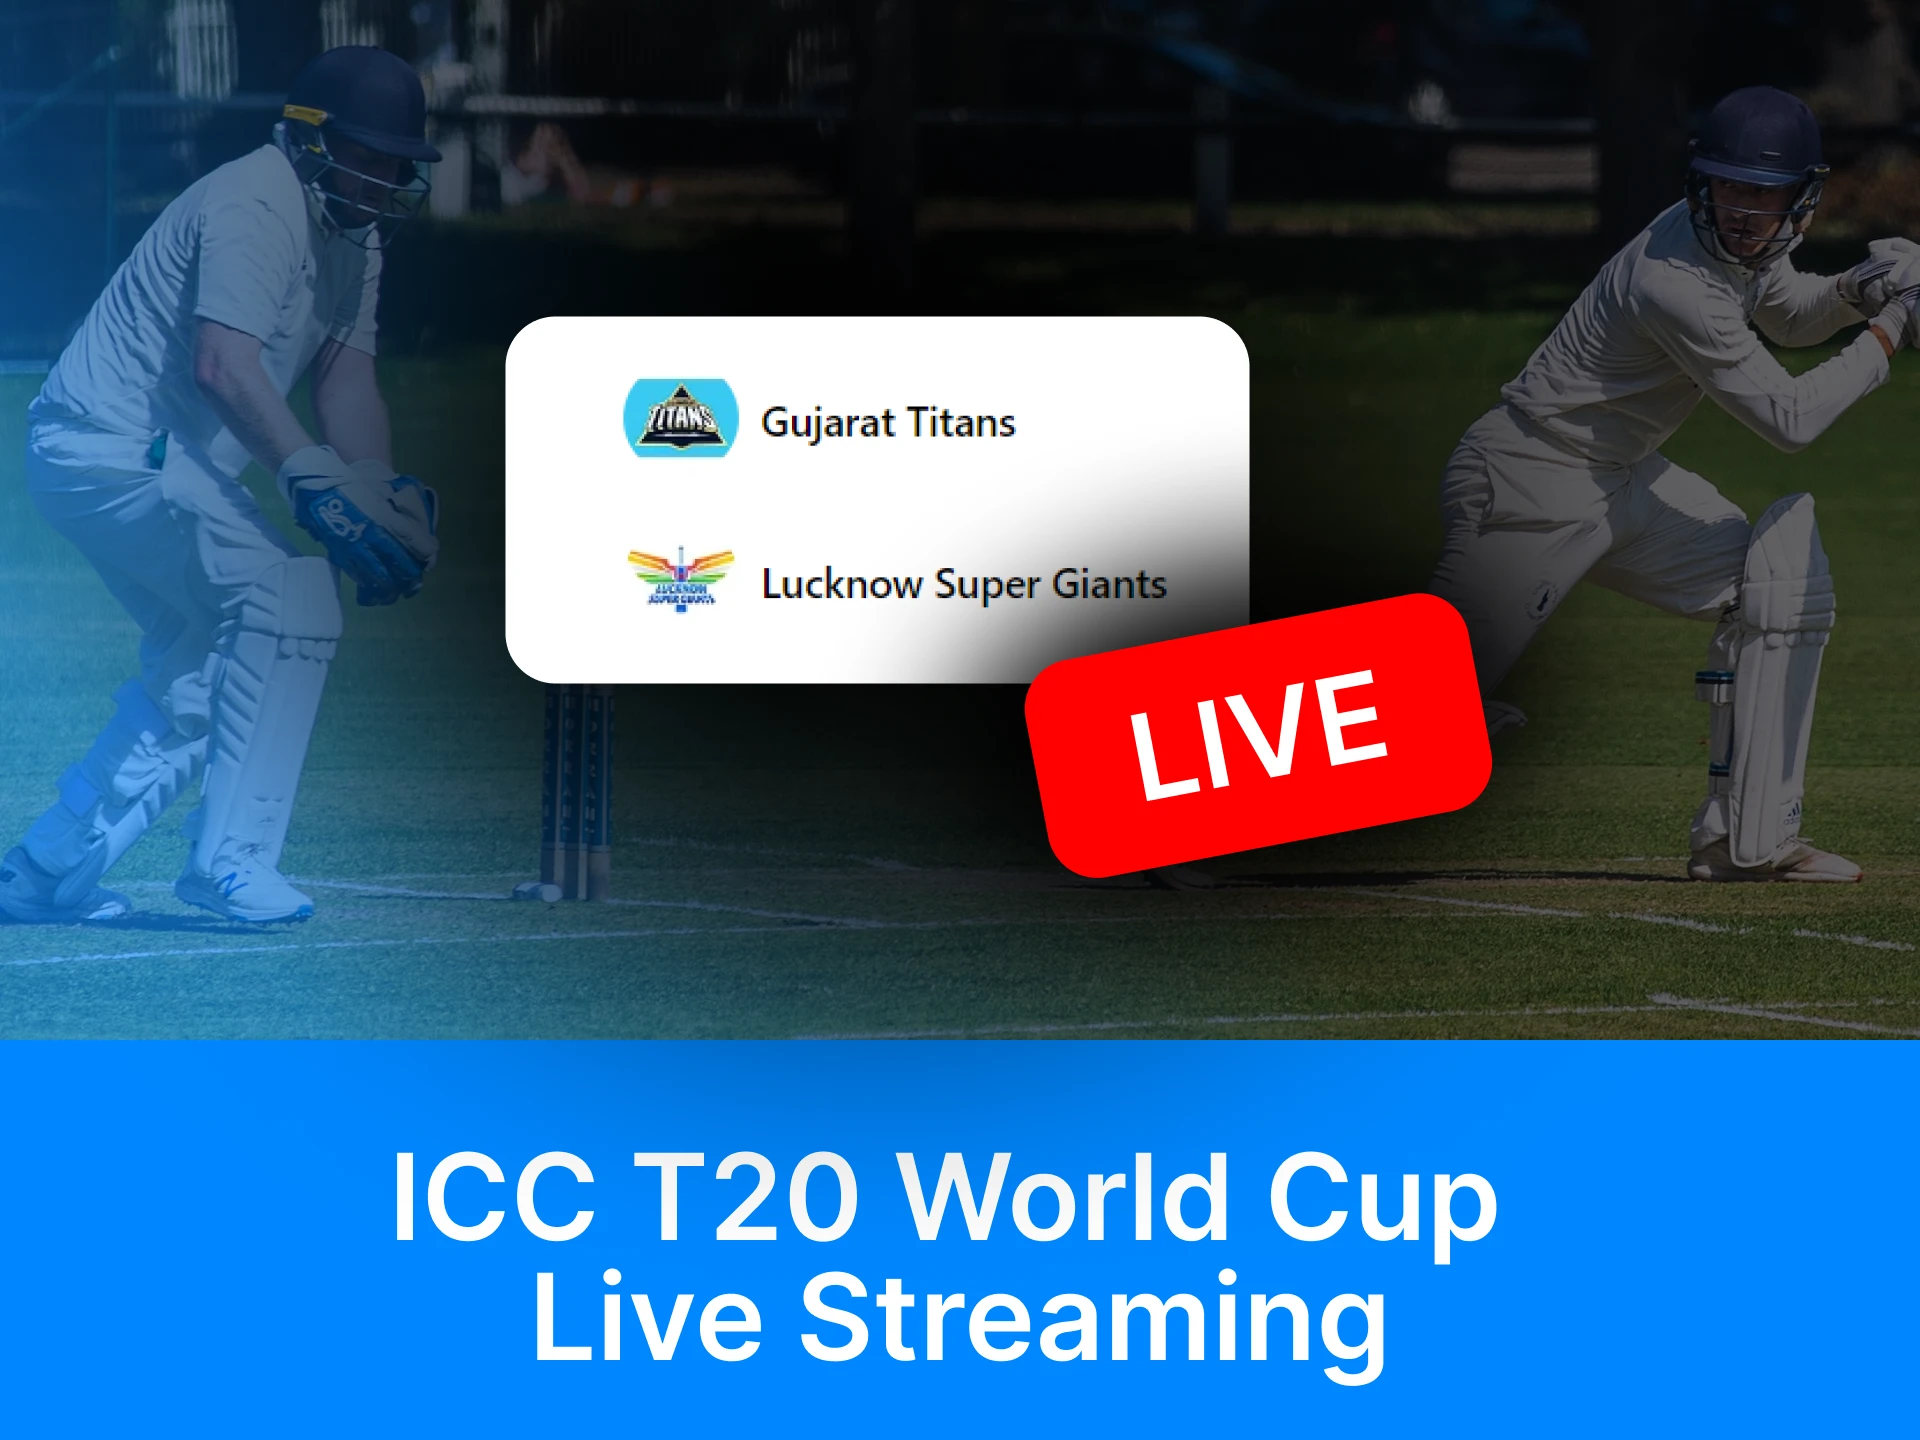 You can watch the ICC T20 events online.